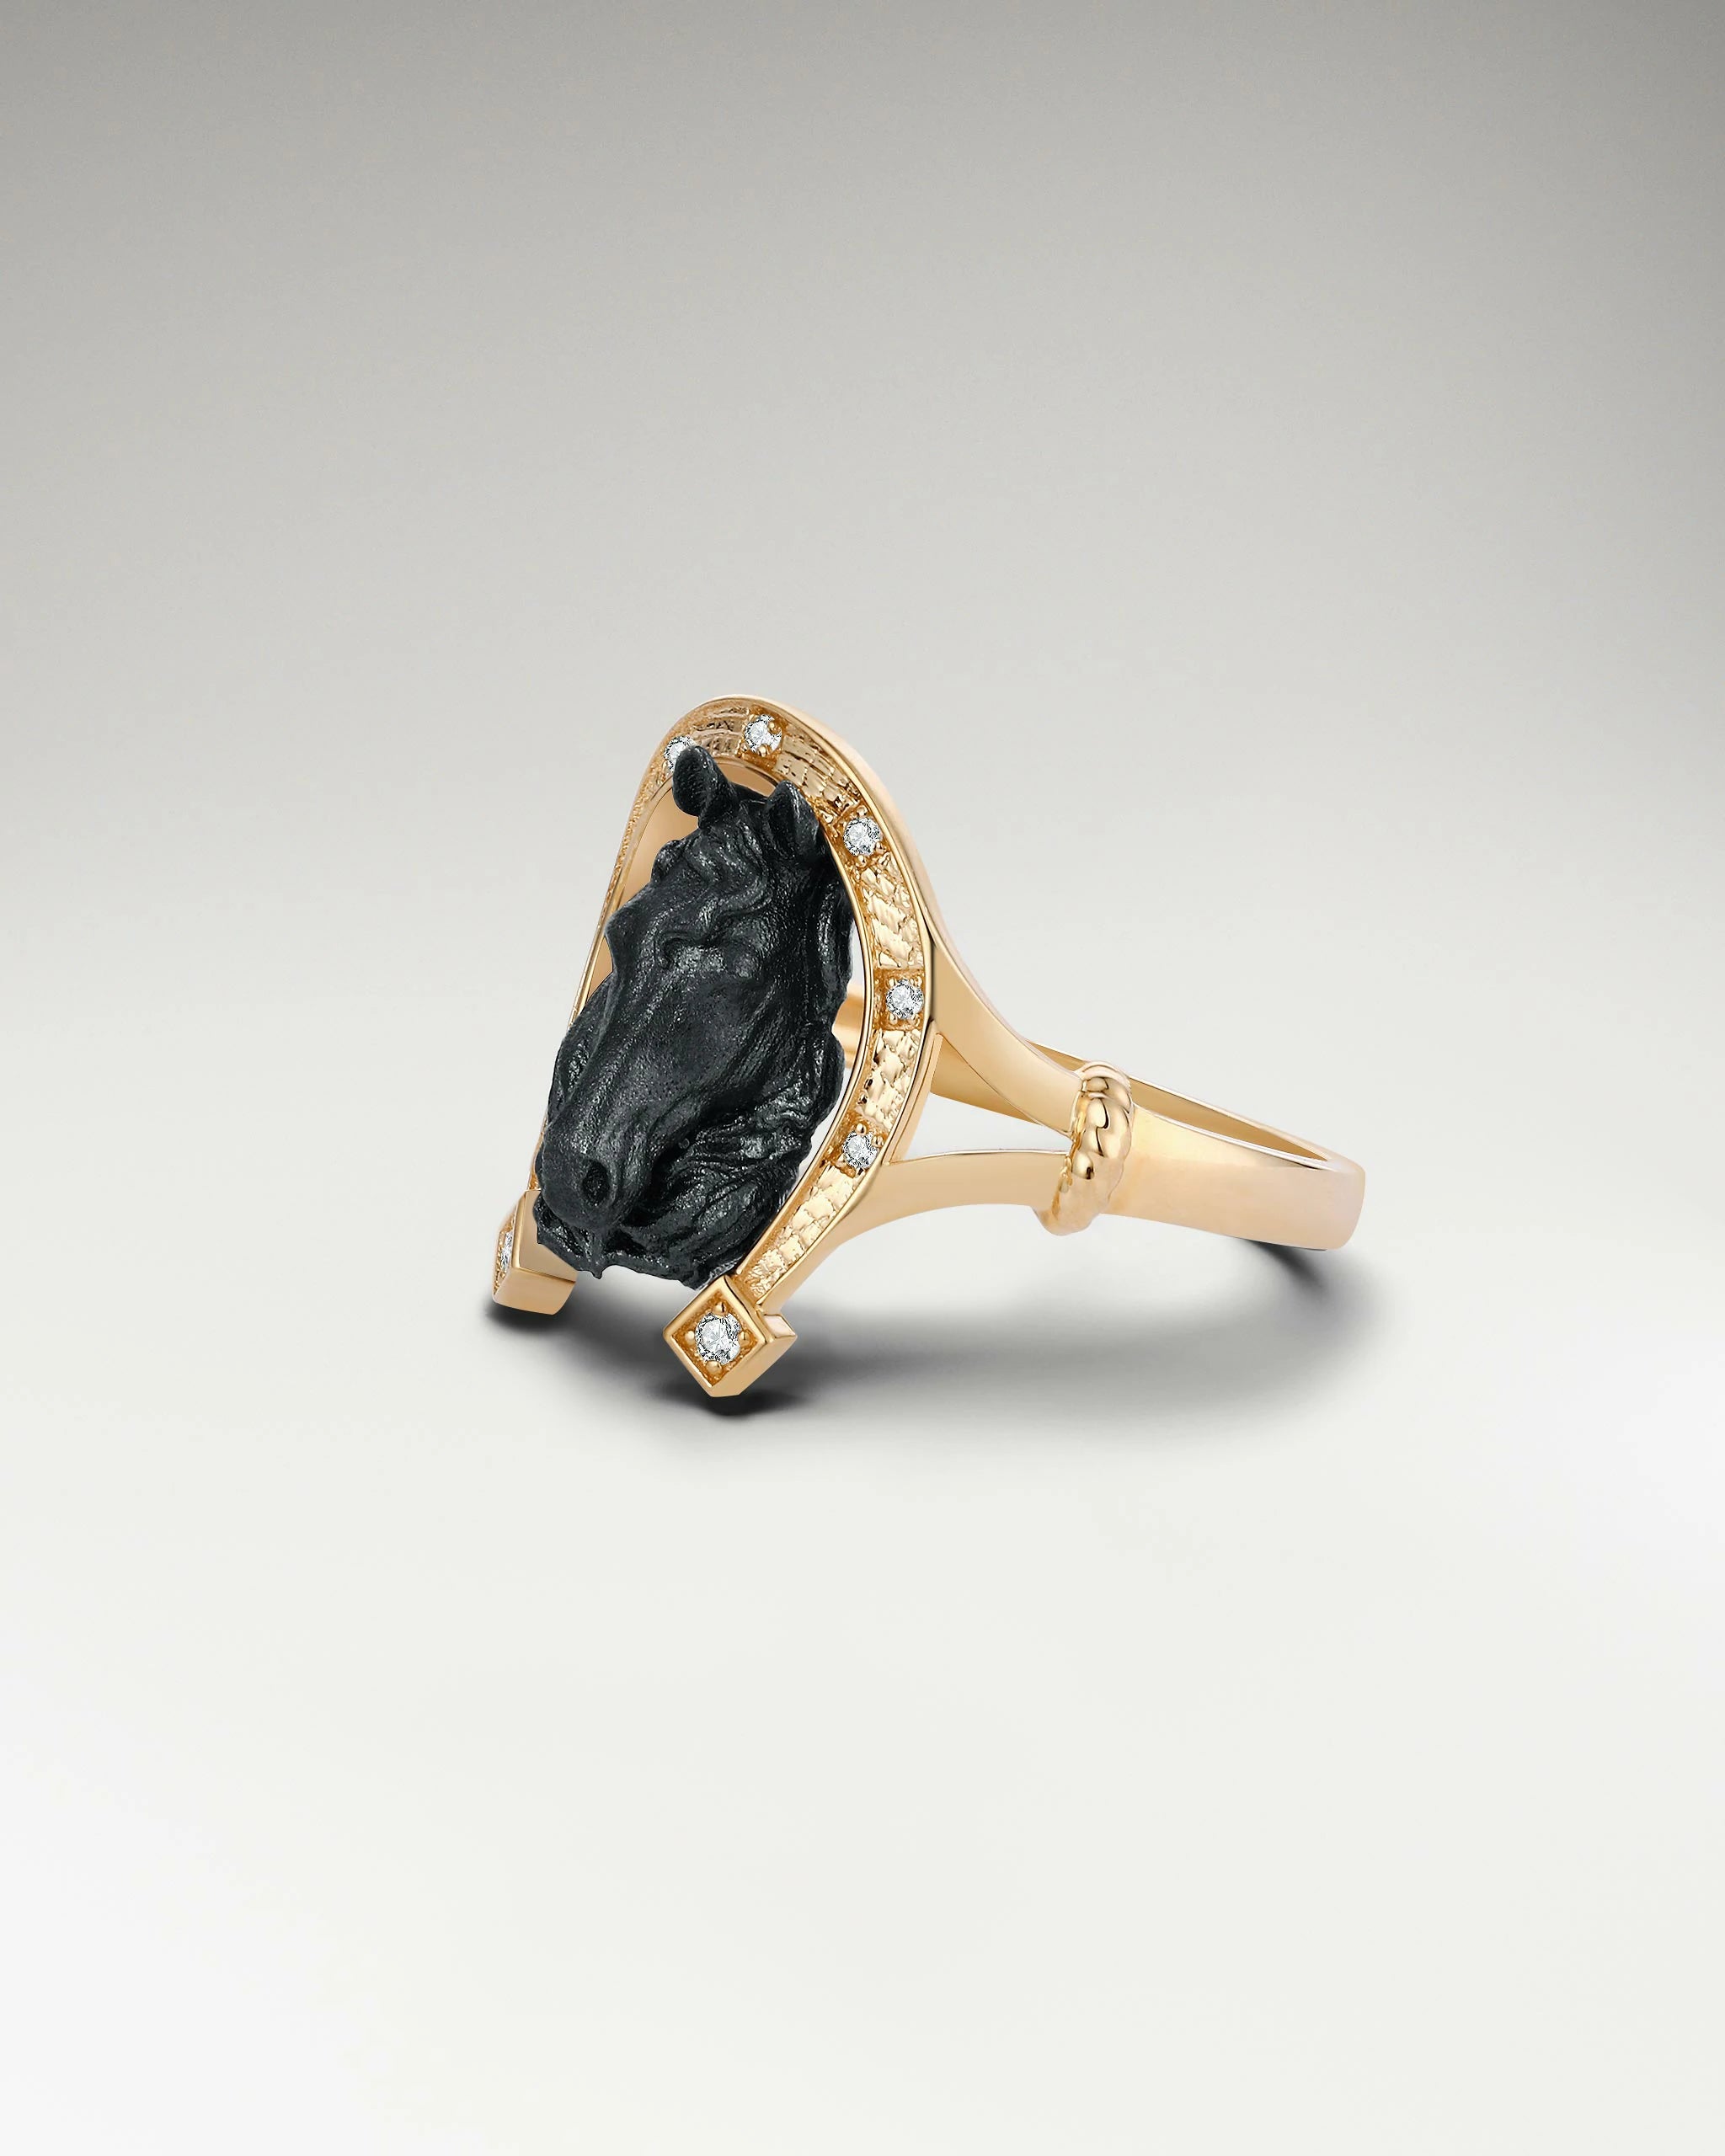 Horseshoe Sculpture Ring in 10k Gold and Spinel